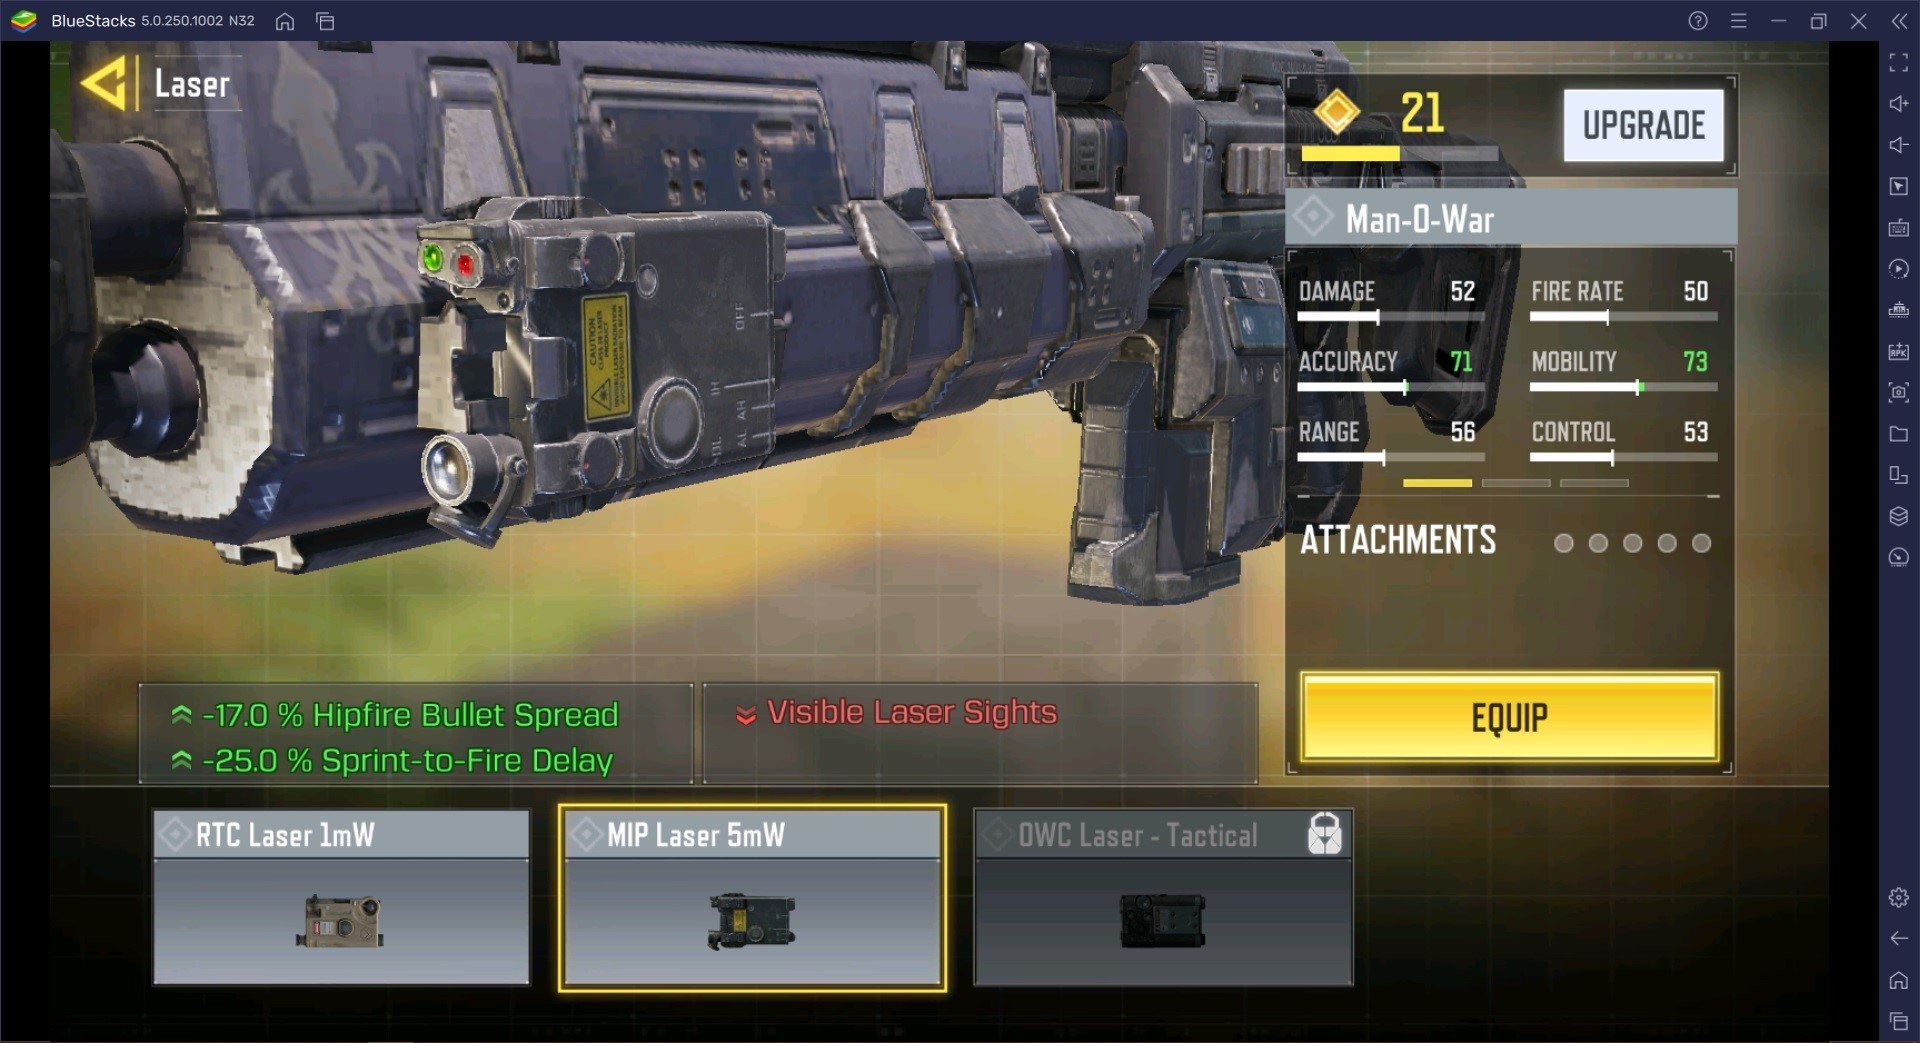 Call of Duty Mobile Man-O-War Weapon Guide for Season 5